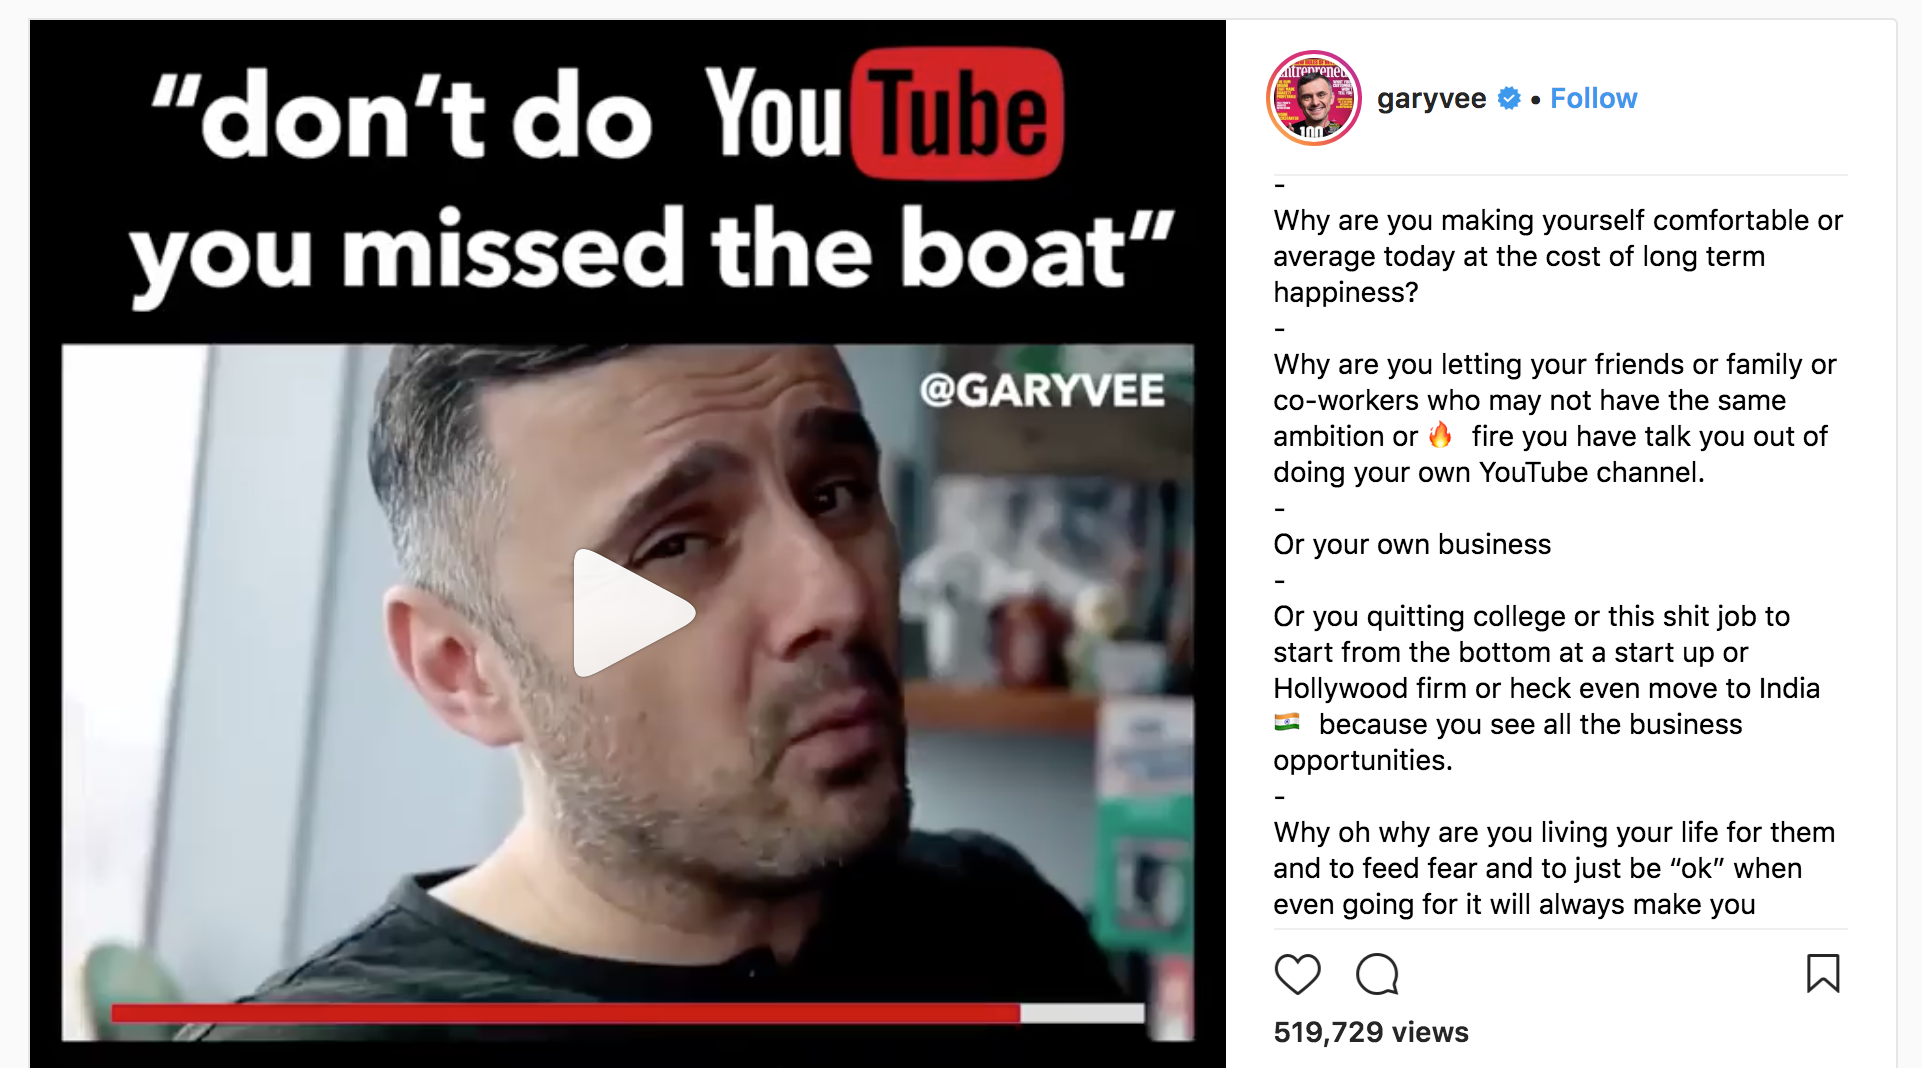 While GaryVee's advice to encourage people to create something.